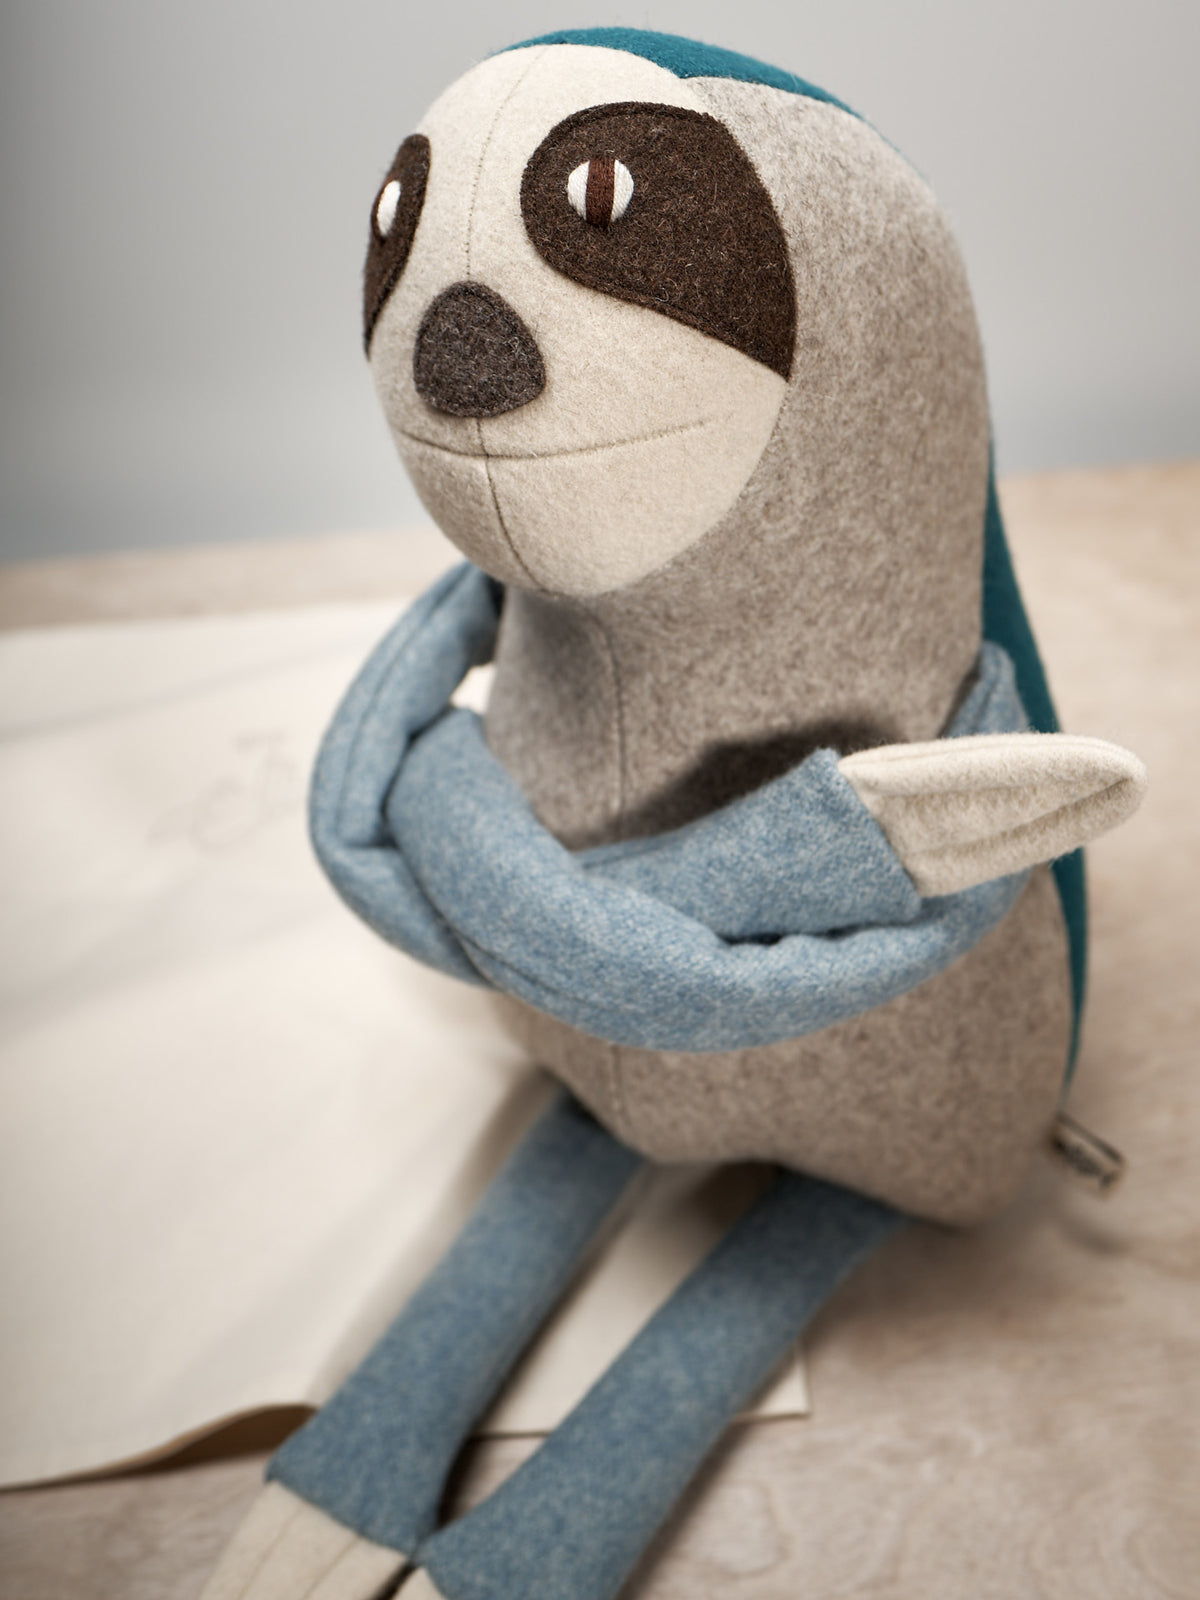 A NED, the Brown-Throated Sloth stuffed animal is sitting on top of a piece of paper.